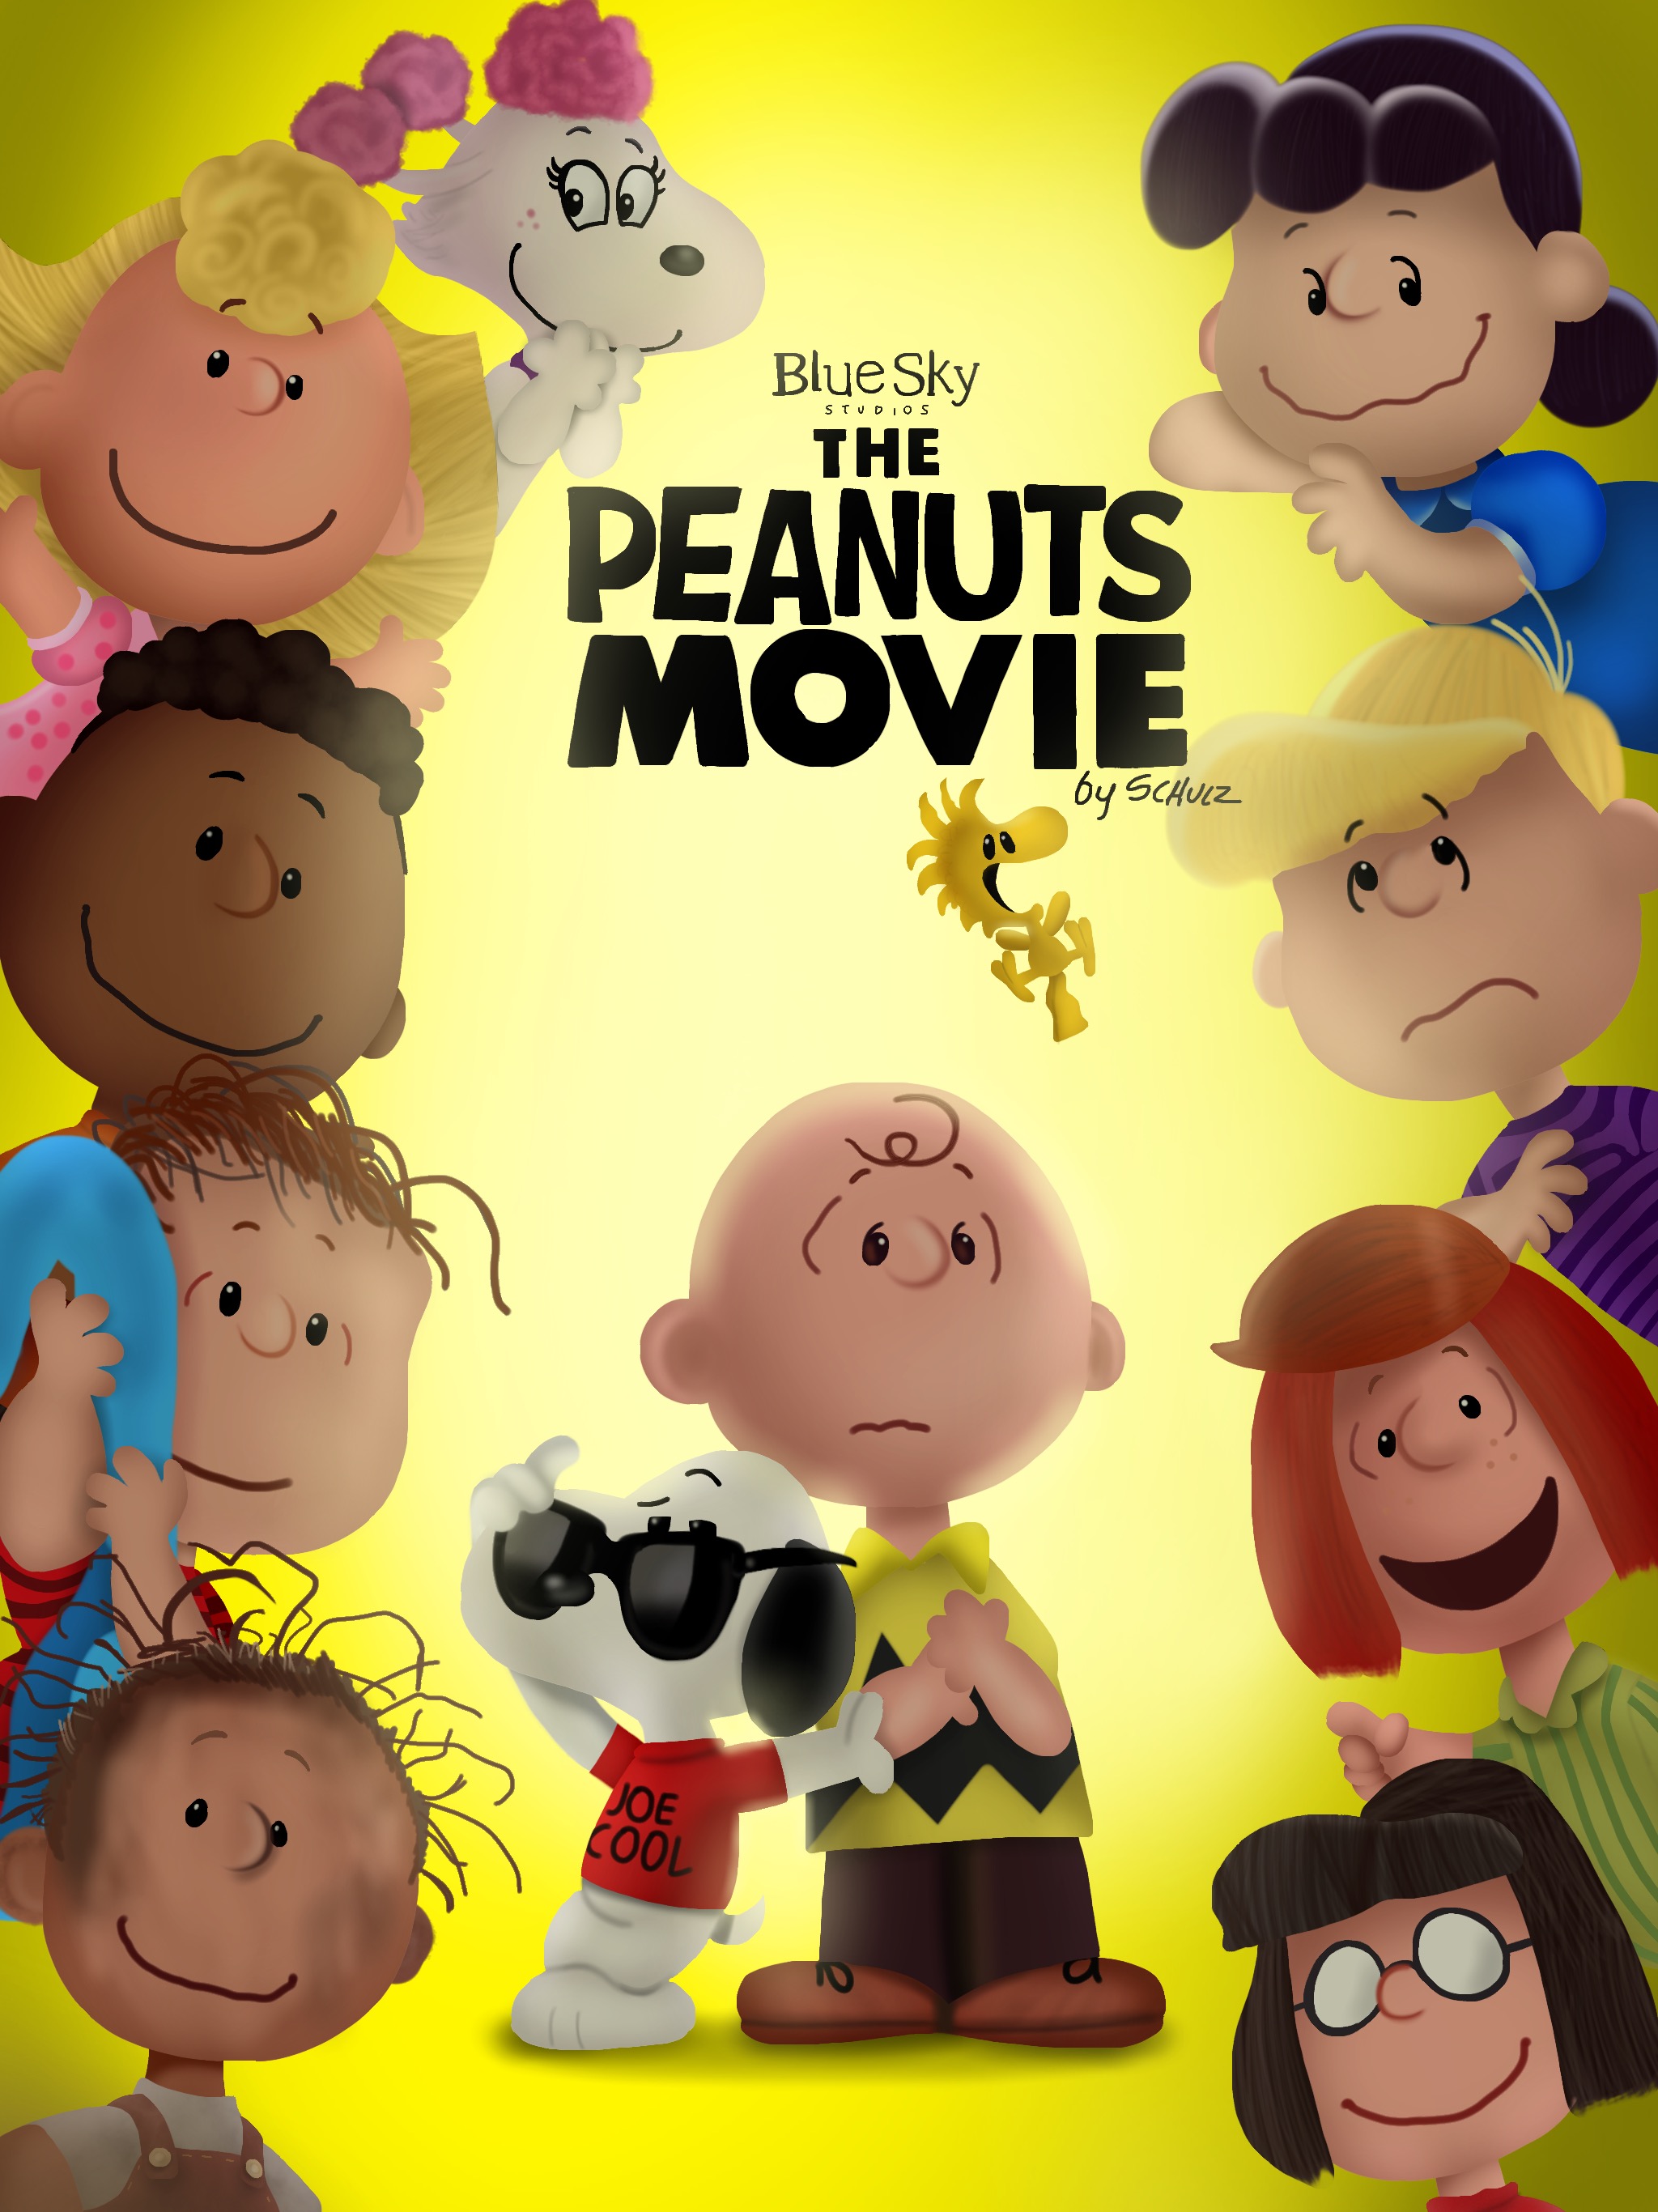 The Peanuts Movie (Fan Made Poster) by JustSomePainter11 on DeviantArt2048 x 2732